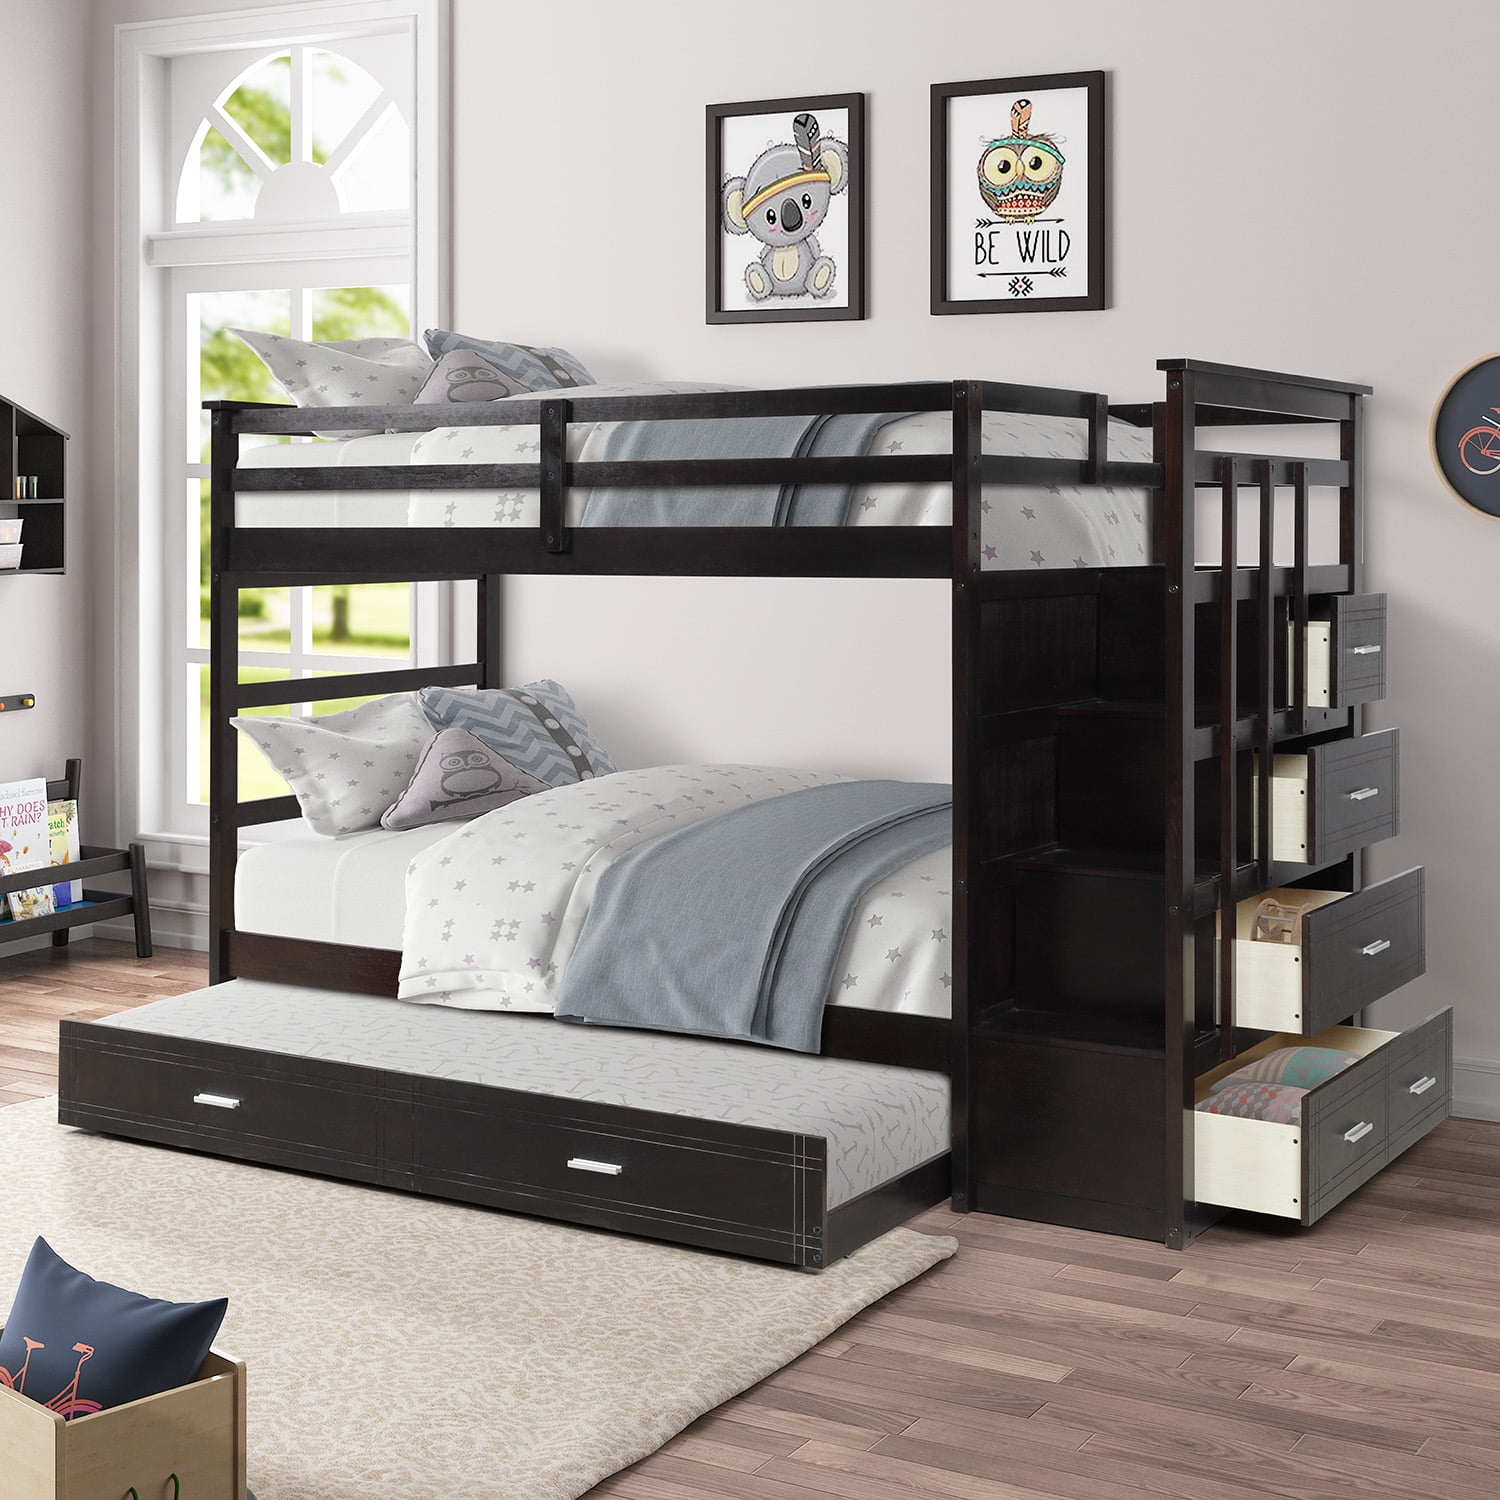 Wood Bunk Beds Twin Over Bed, Wooden Bunk Beds With Steps